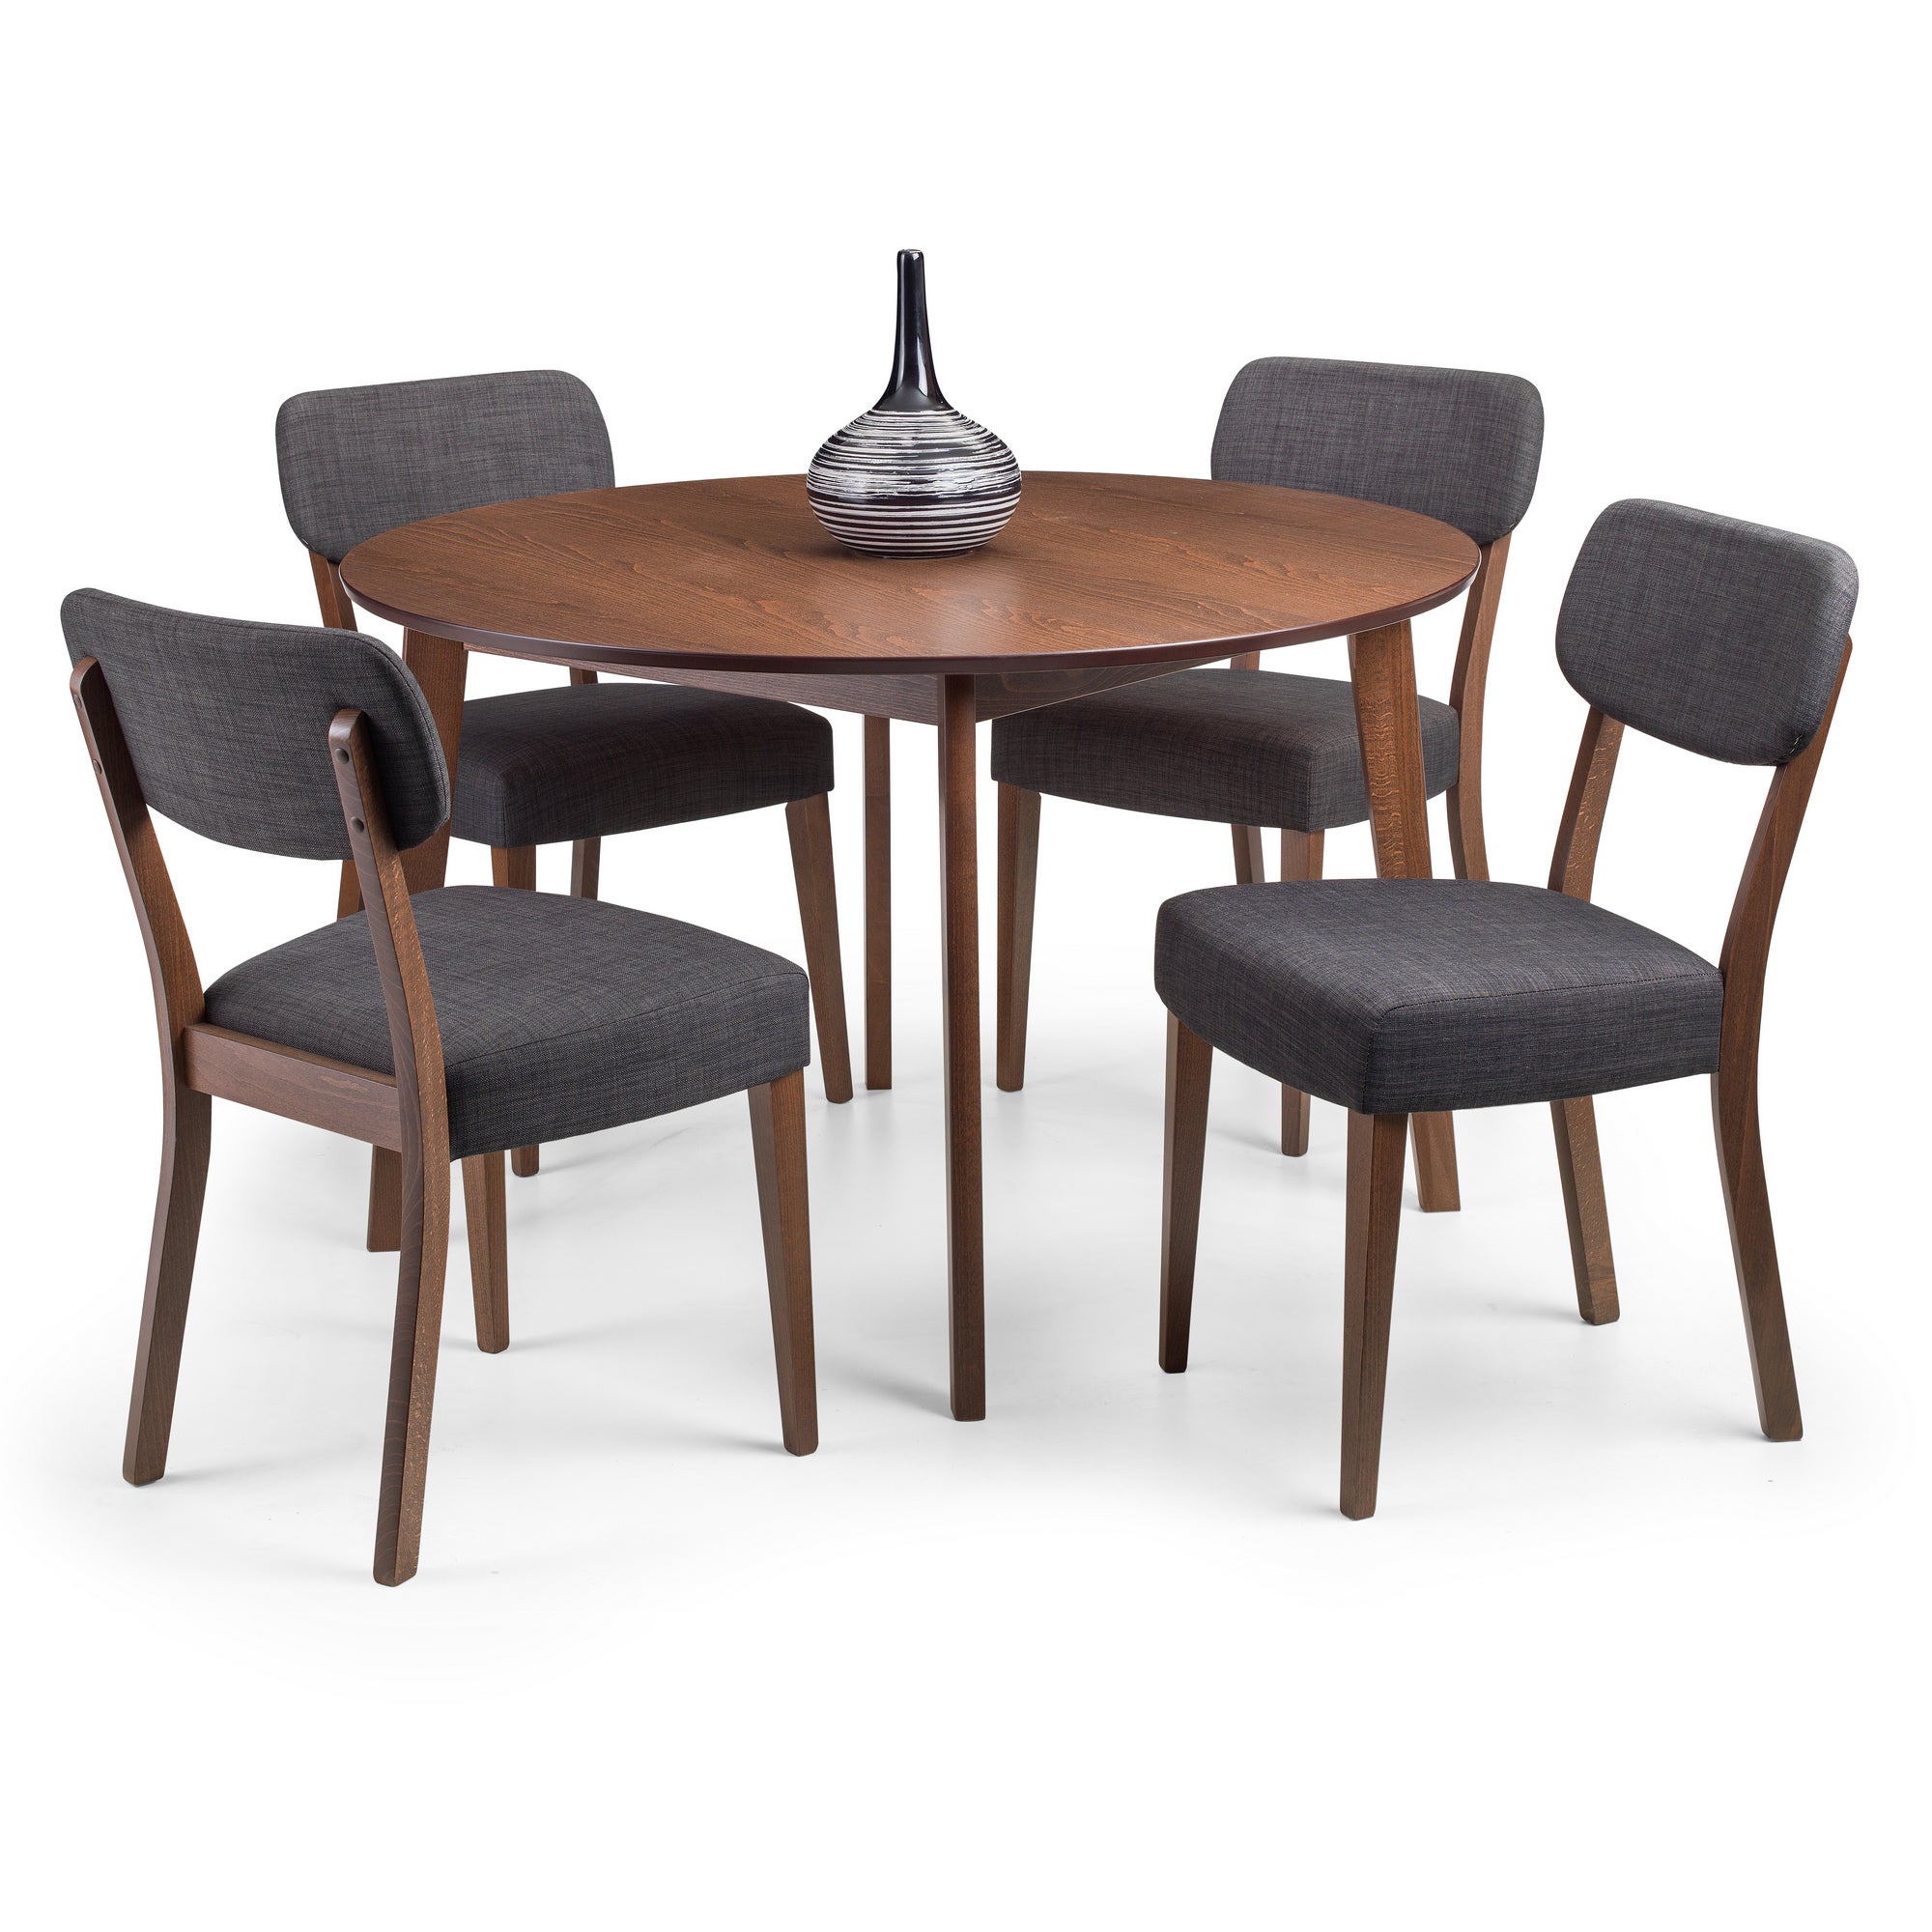 Farringdon Round Dining Table With 4 Chairs Beech Wood Brown